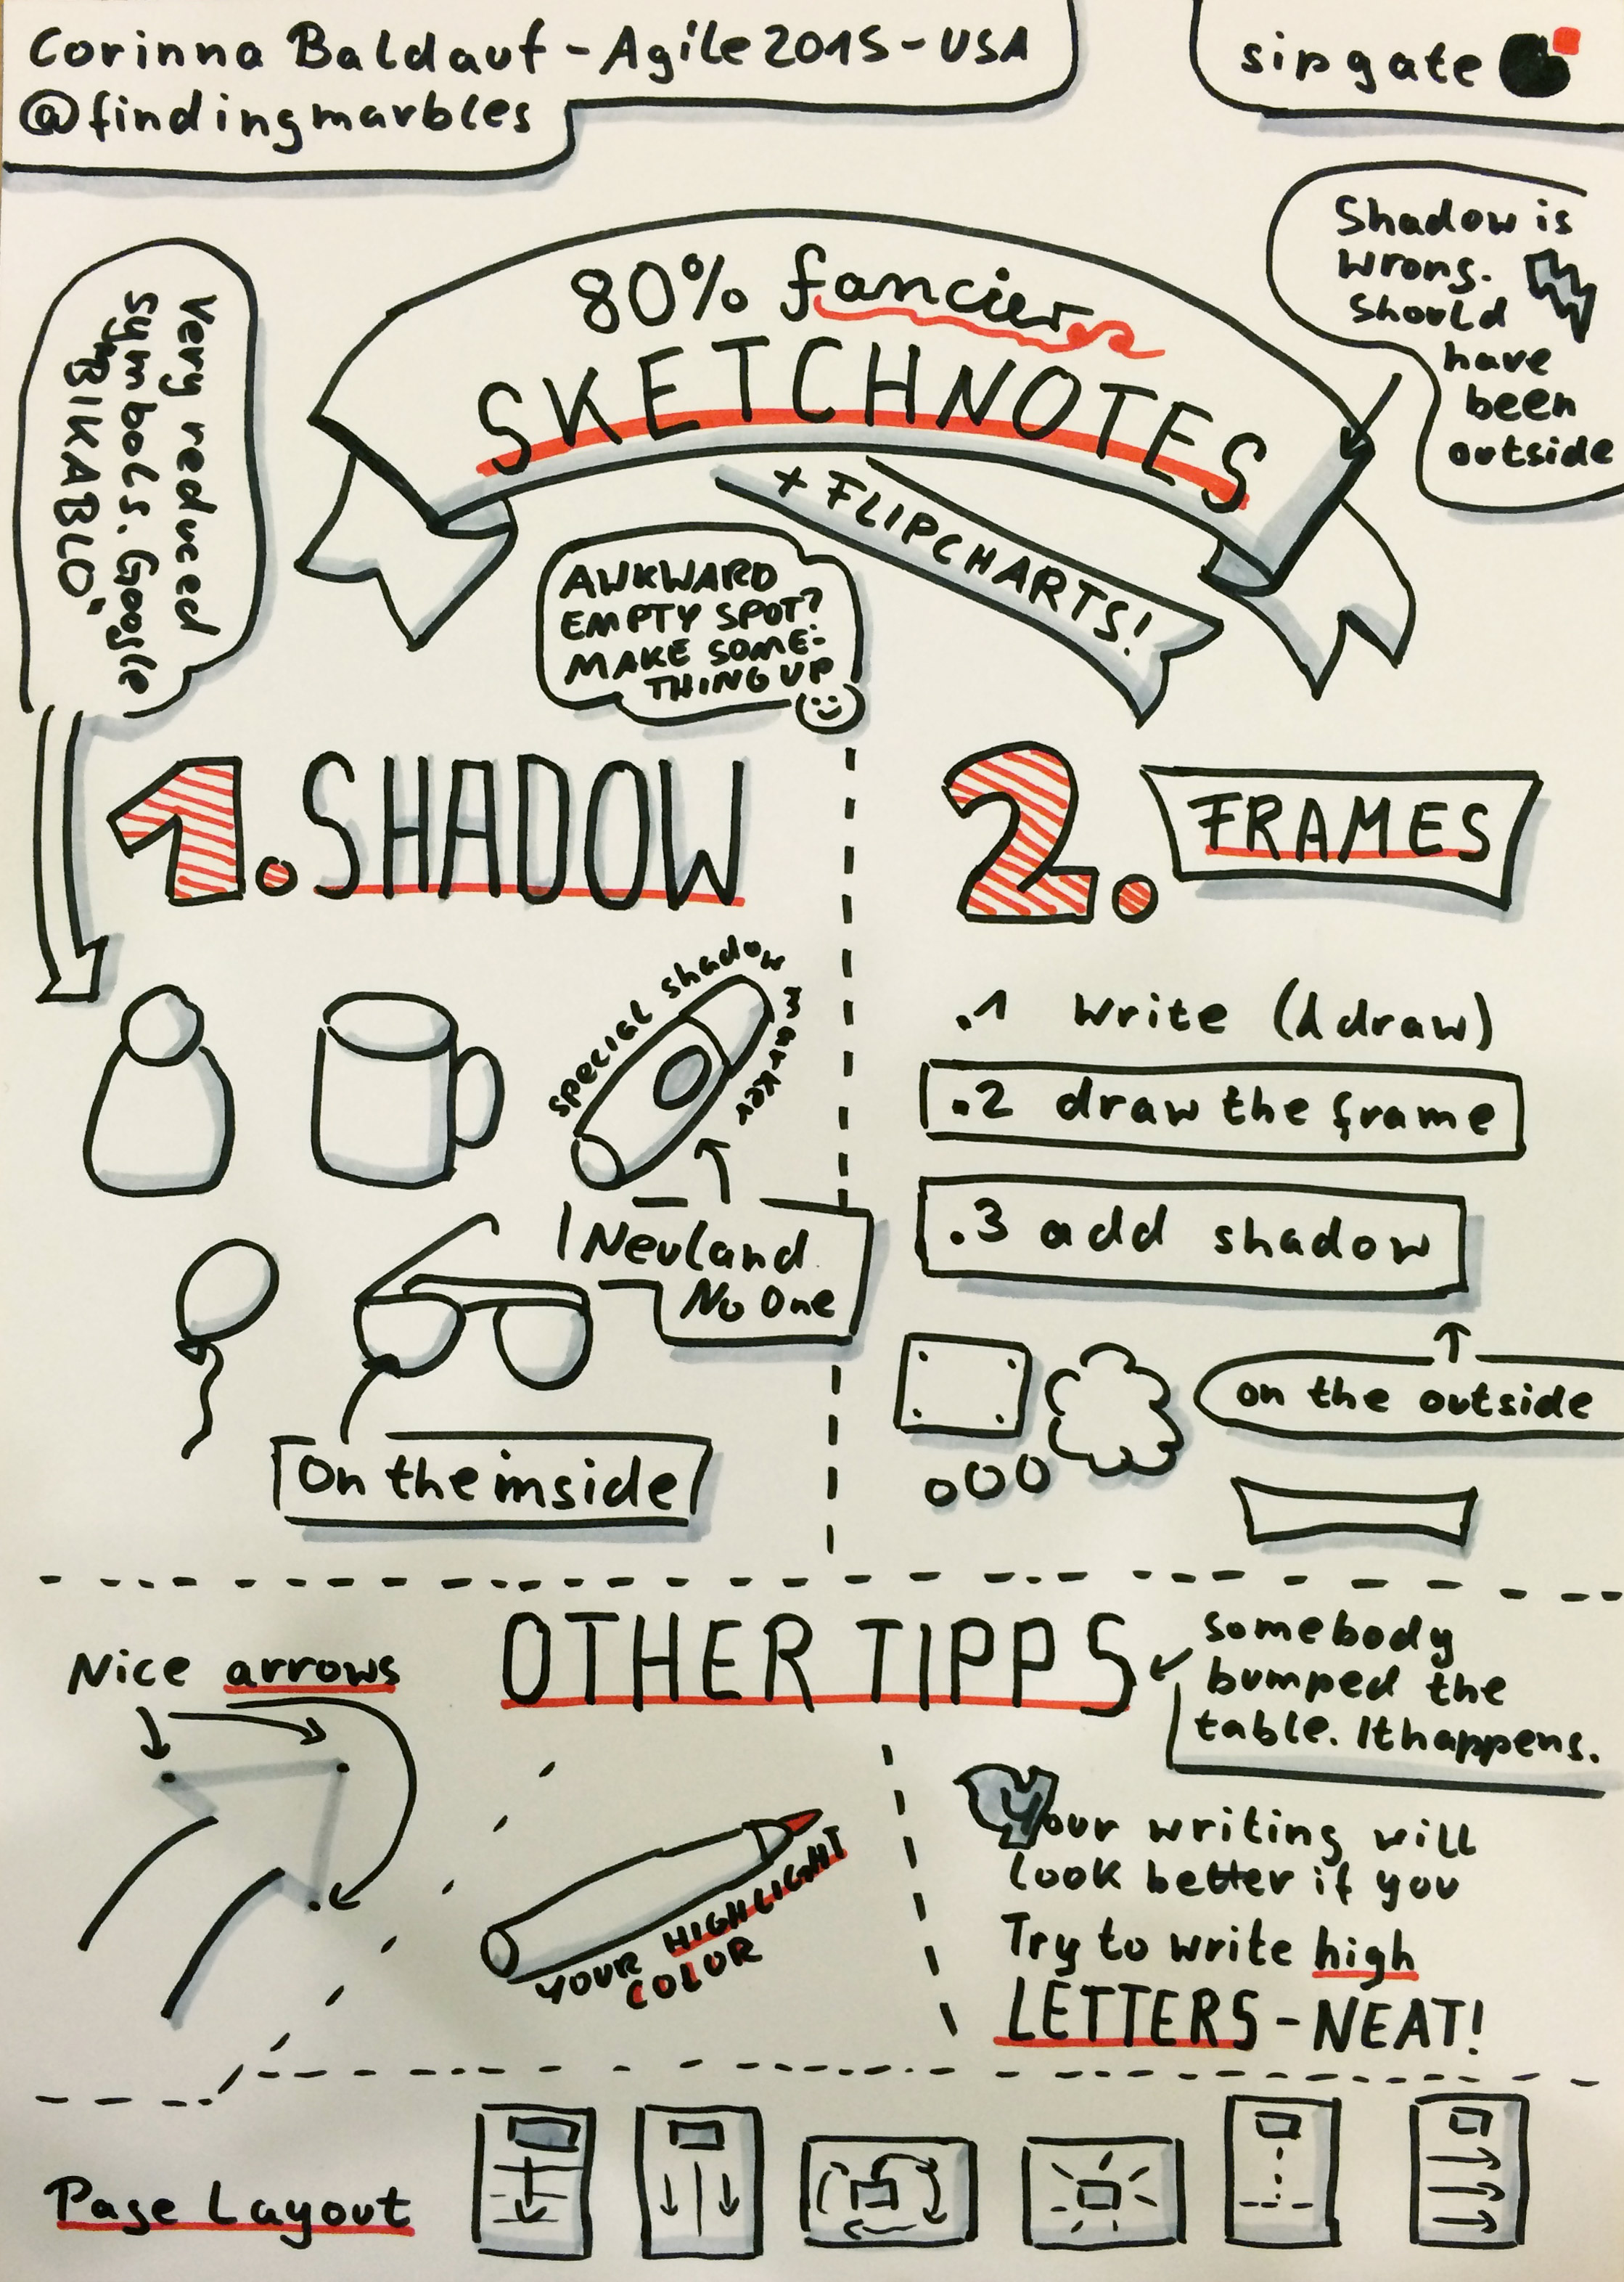 Sketchnotes from Agile 2015 | Finding Marbles